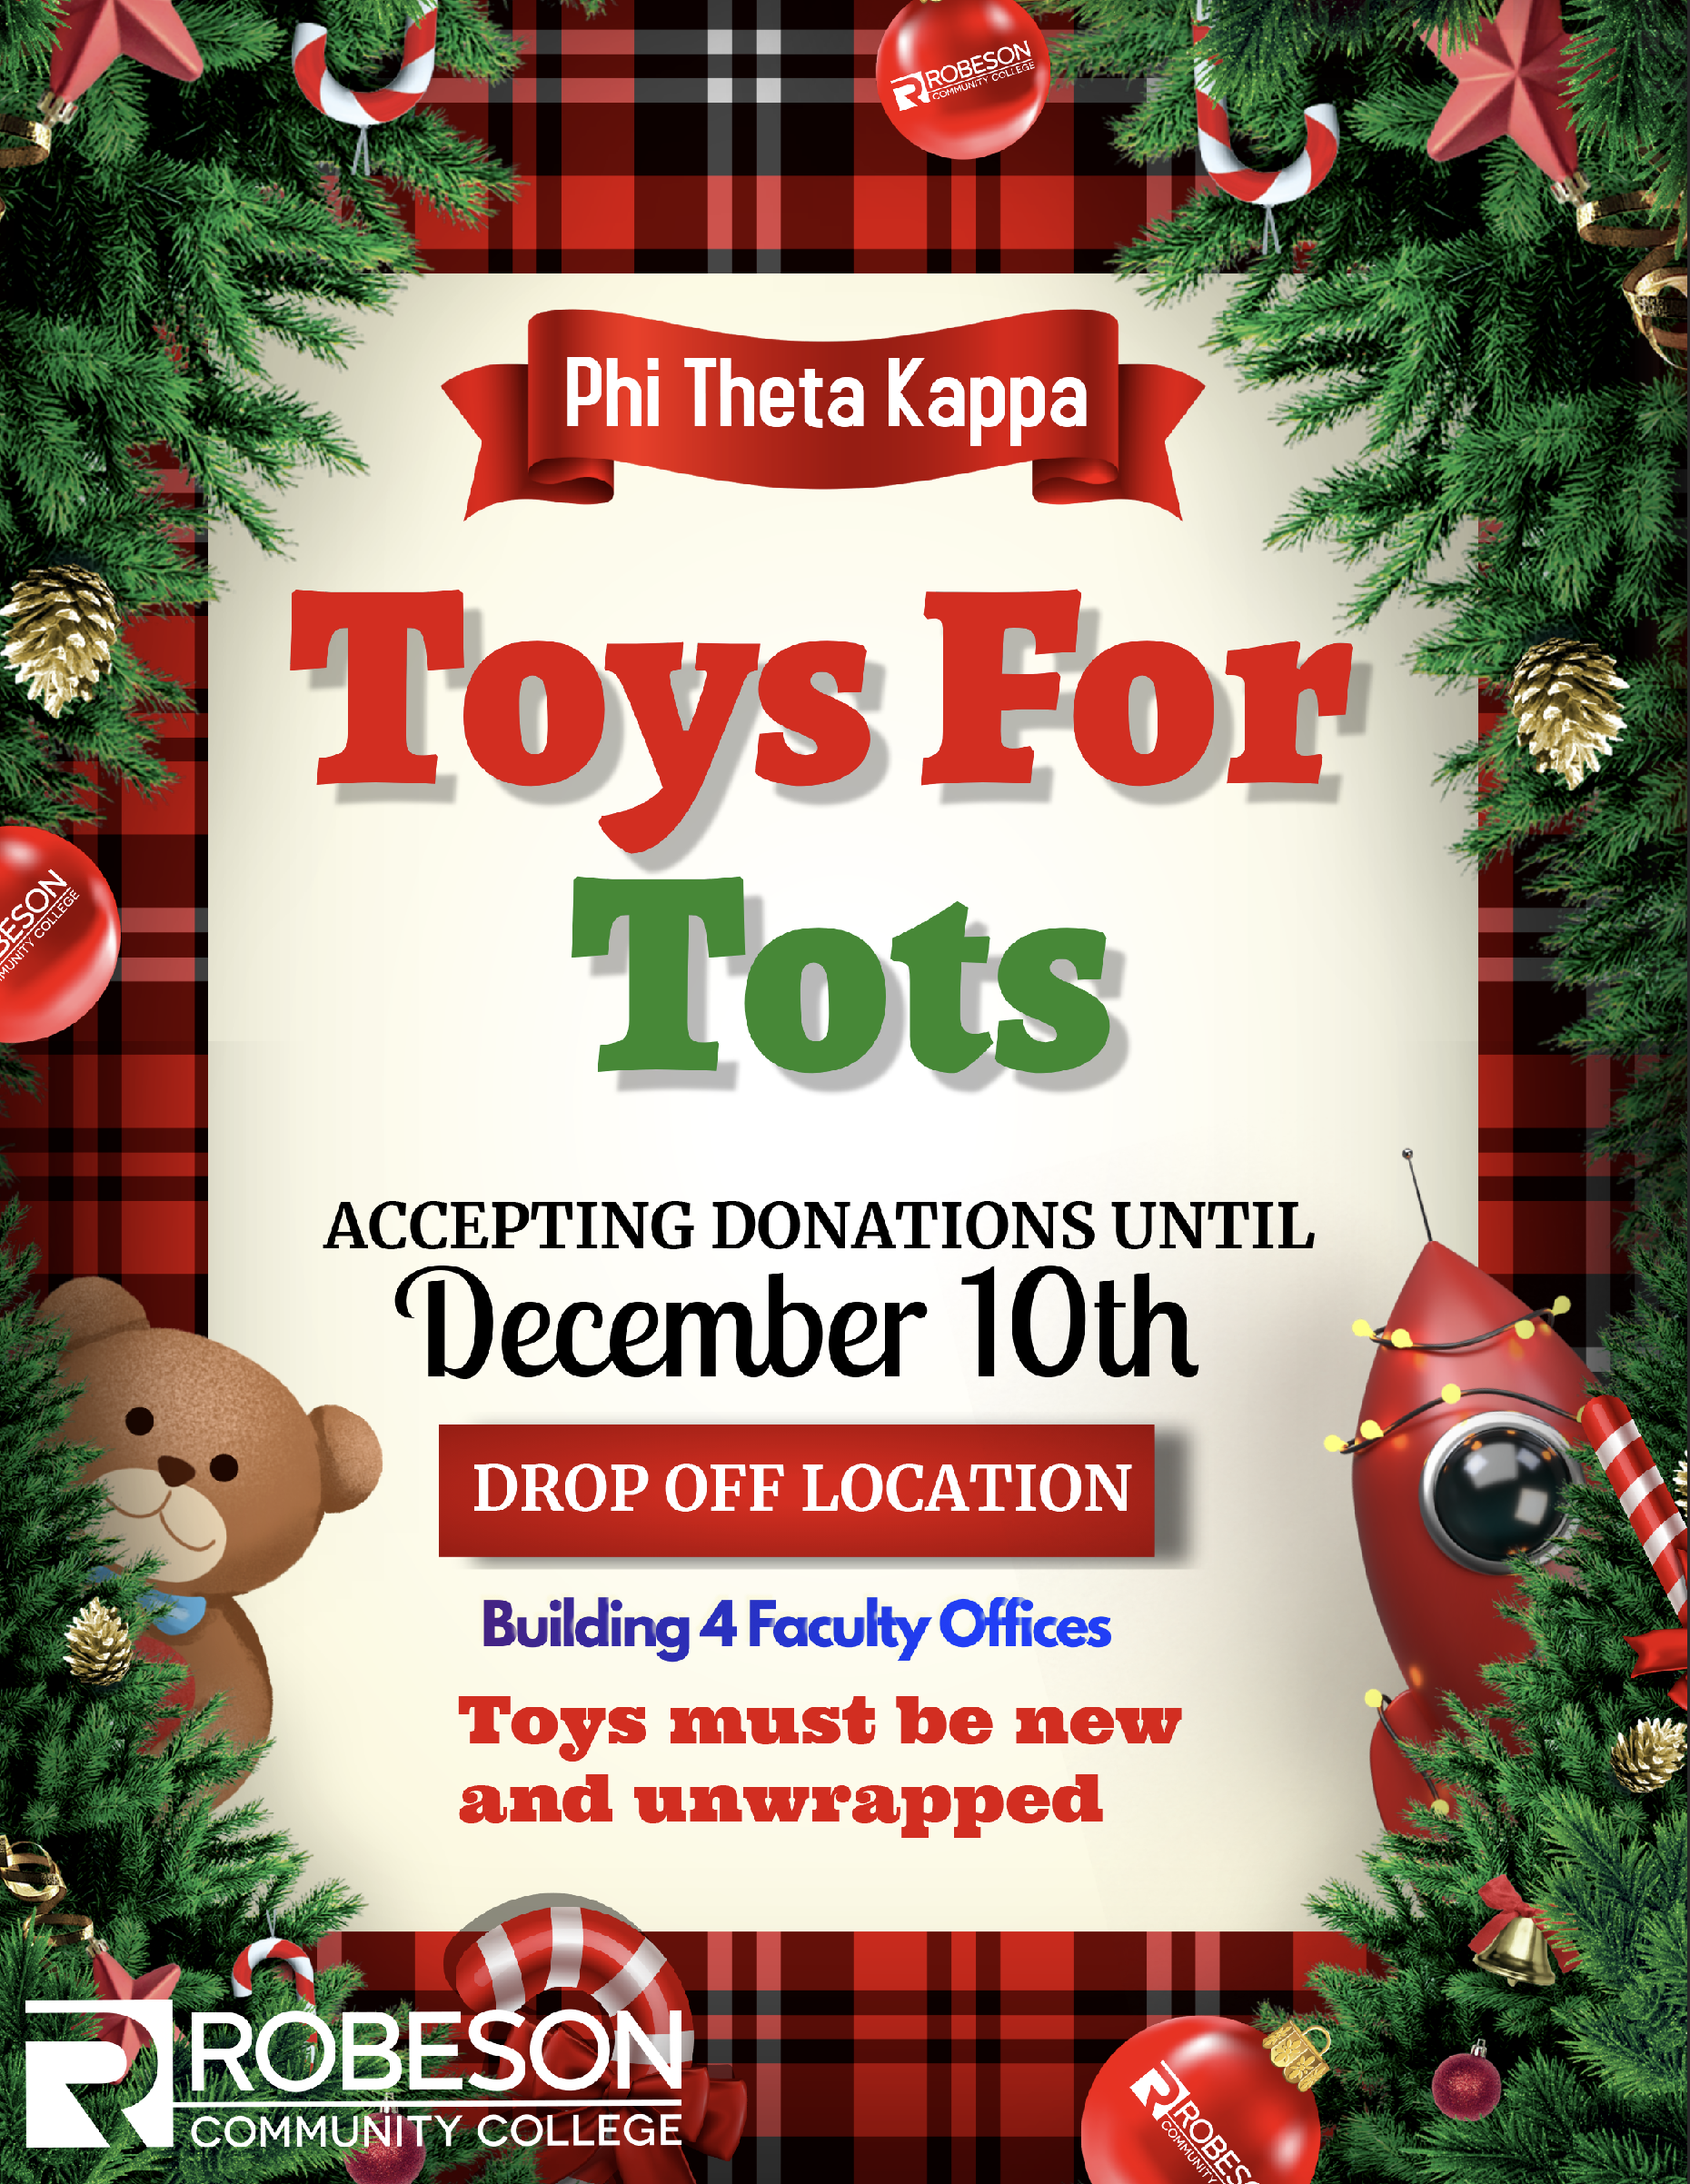 Accepting Toys For Tots Donations